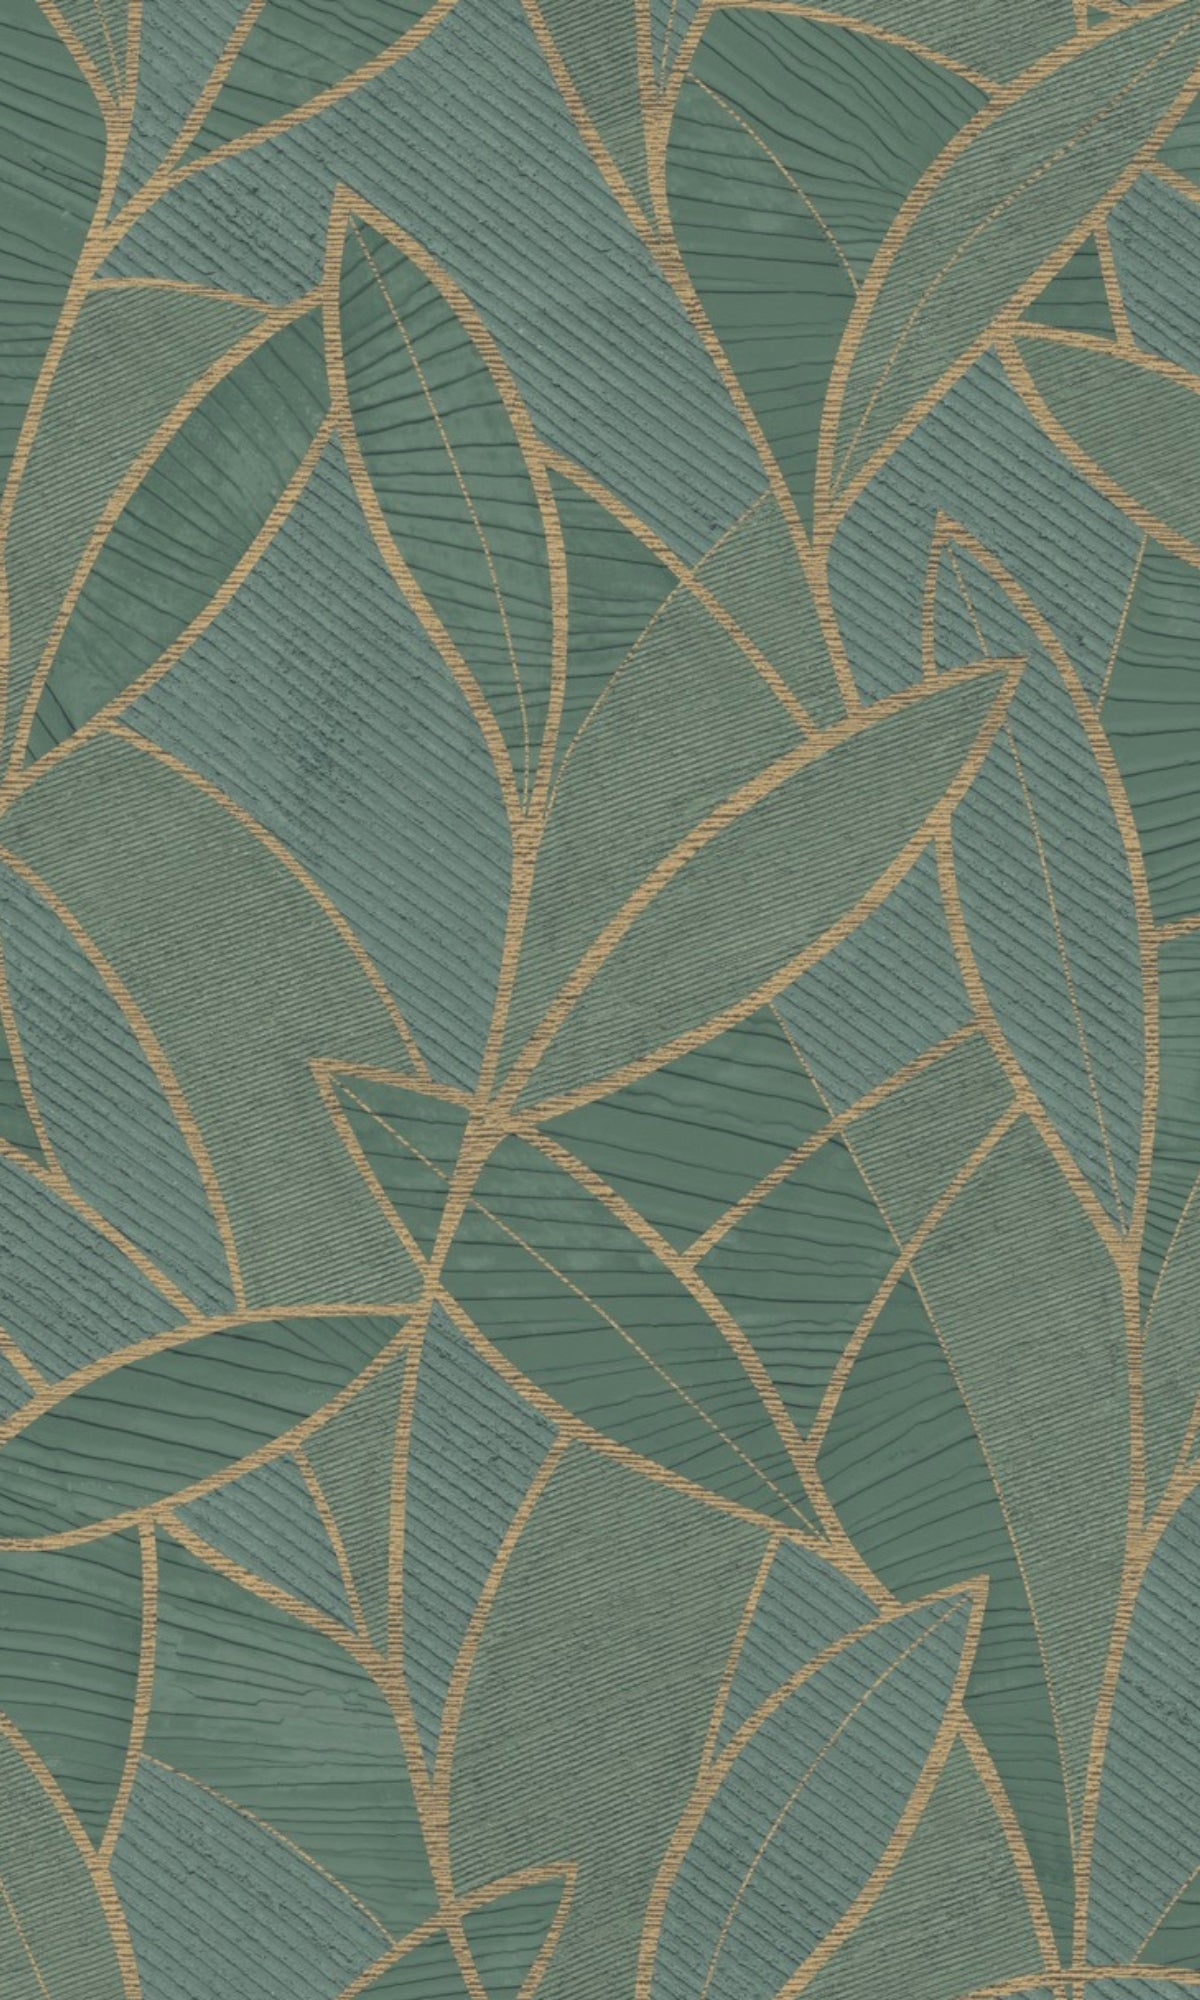 Dark Moss Leaf Motif With Outlines Tropical Wallpaper R9036